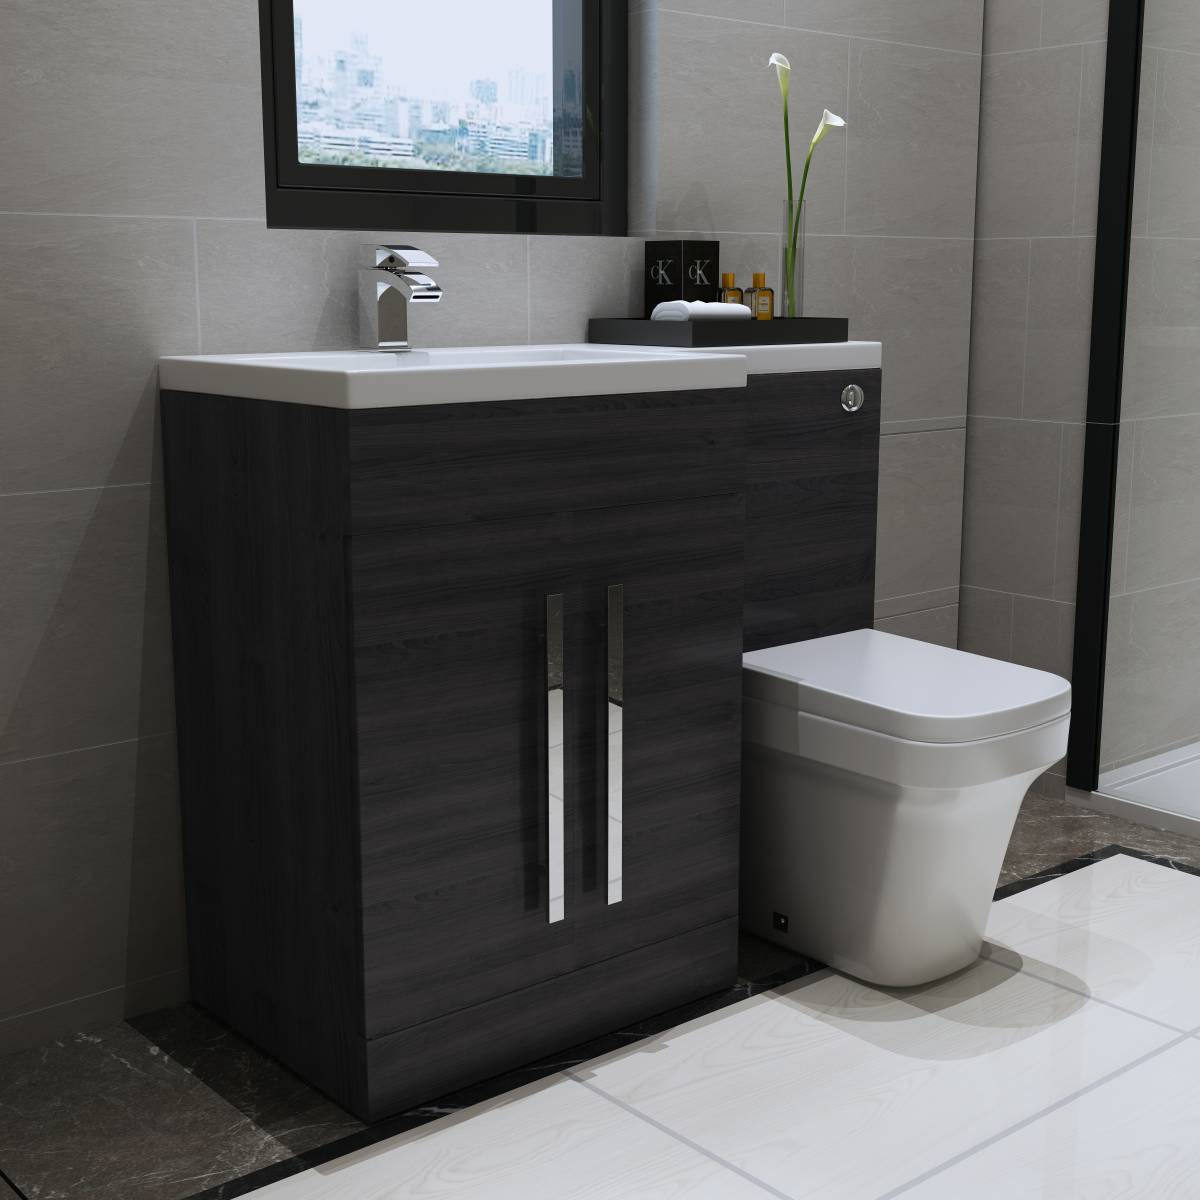 Grey Lh Combination Bathroom Furniture Vanity Unit Basin Back To pertaining to dimensions 1200 X 1200